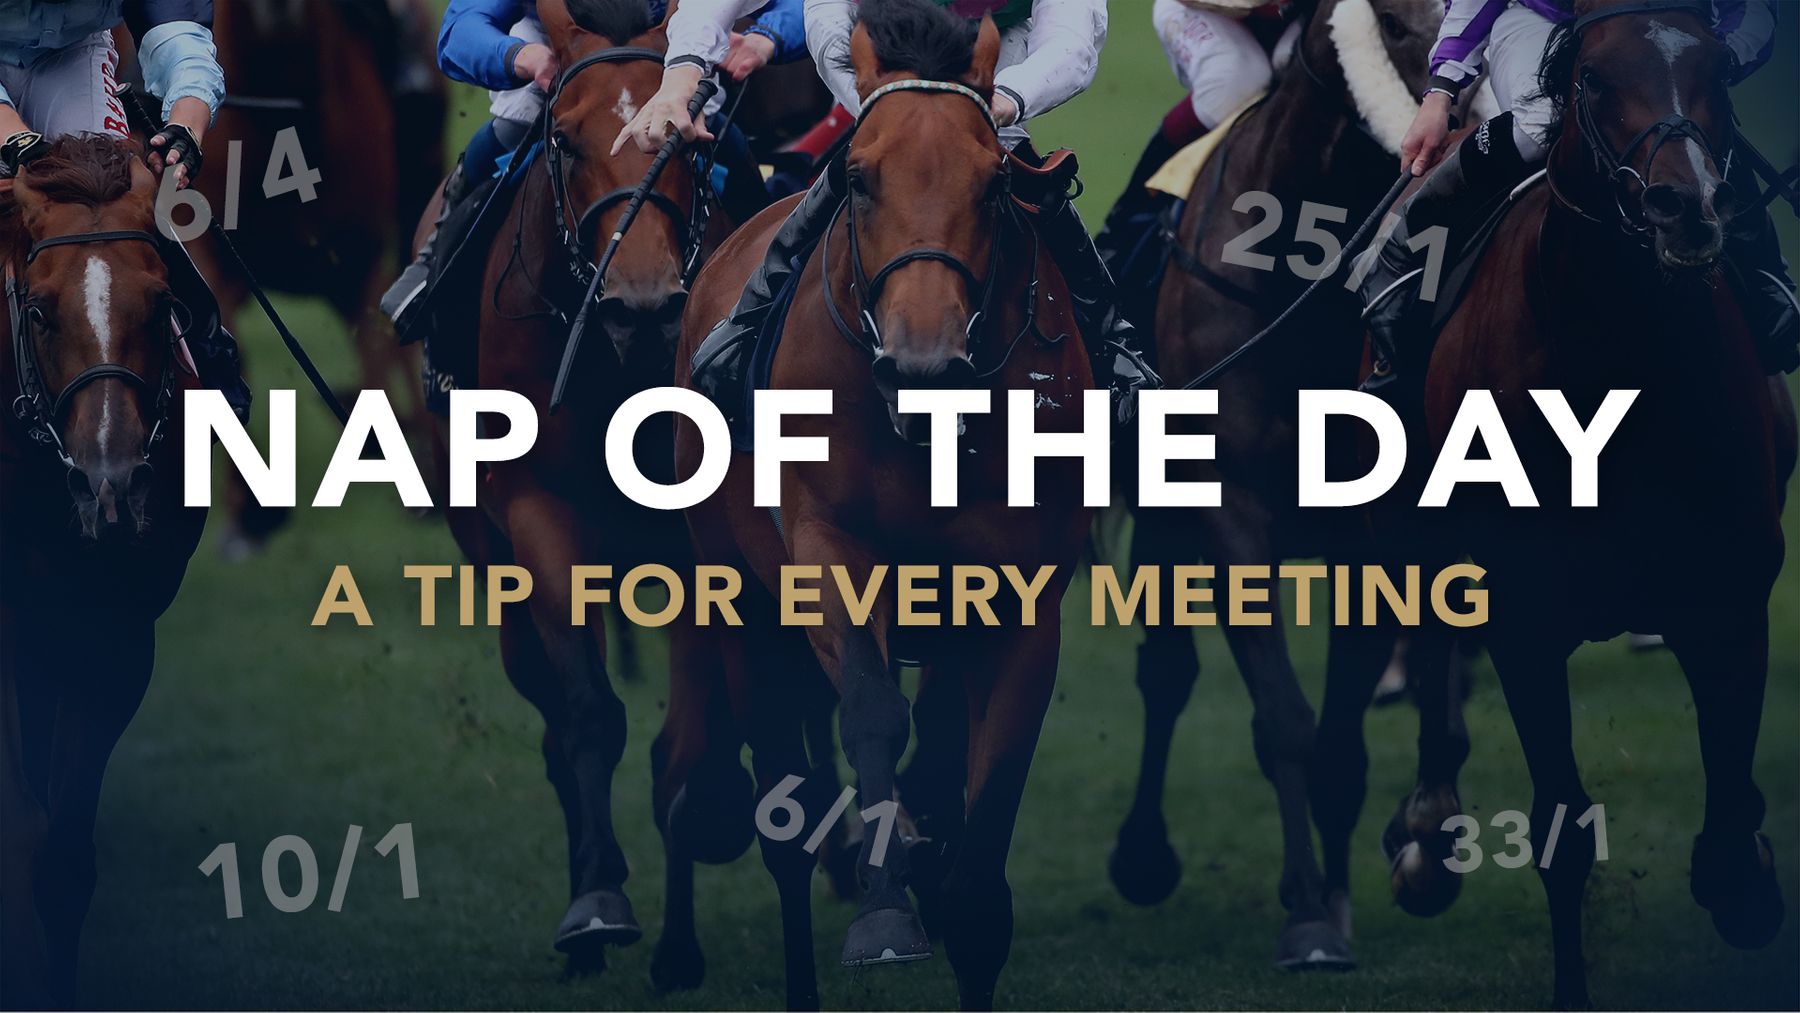 Horse Racing Tips Today: Nap of the Day